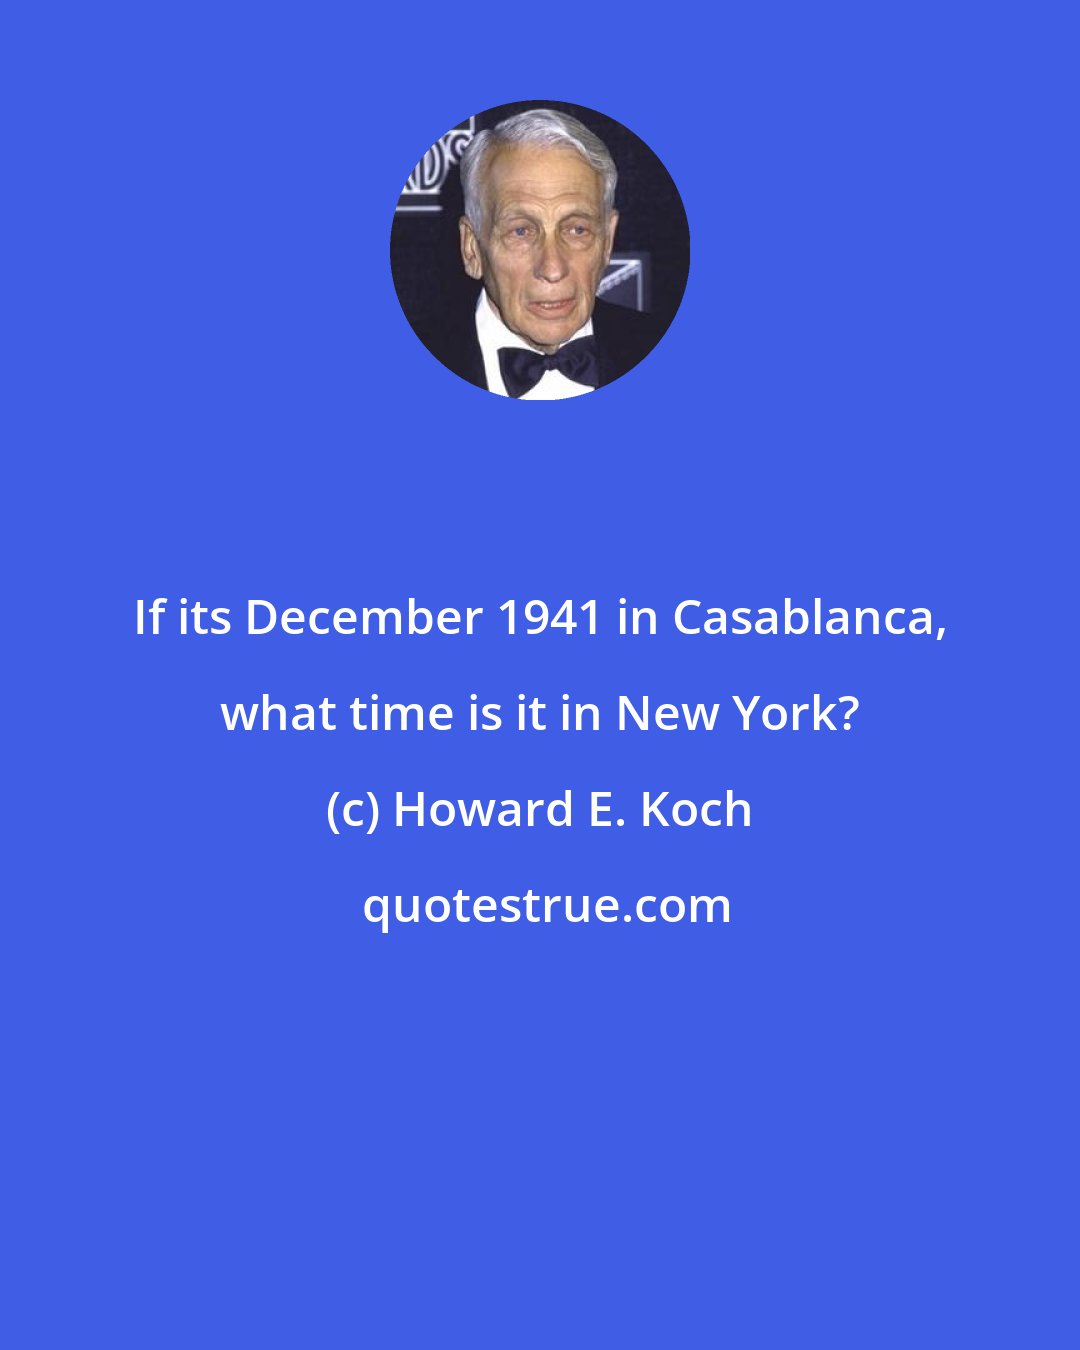 Howard E. Koch: If its December 1941 in Casablanca, what time is it in New York?